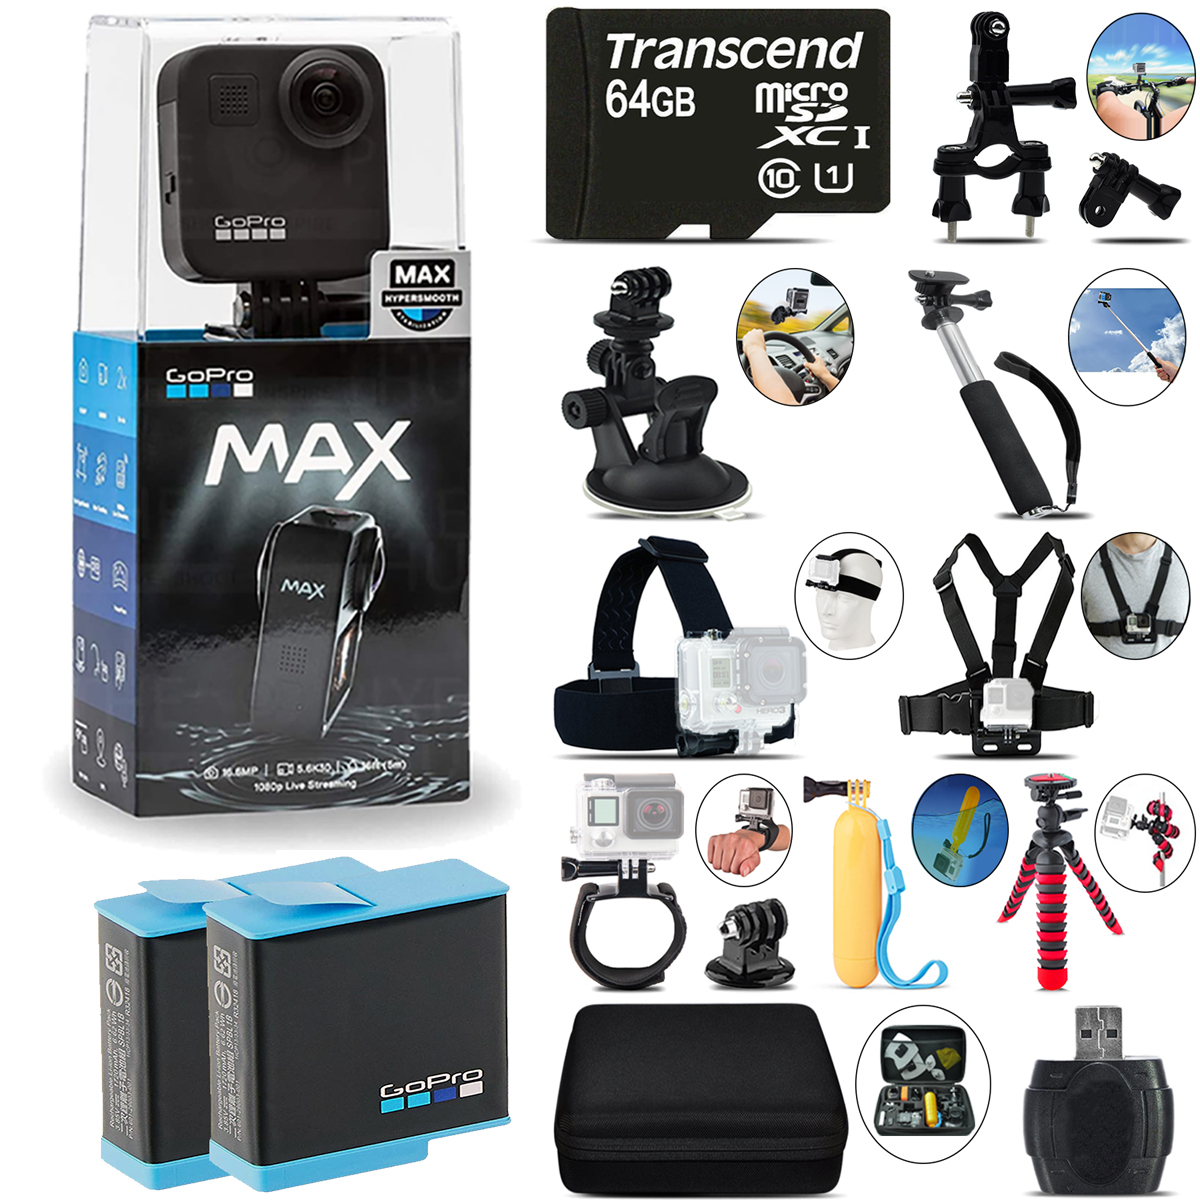 MAX 360 Action Camera + Extra Battery & Much More! - 64GB Kit *FREE SHIPPING*